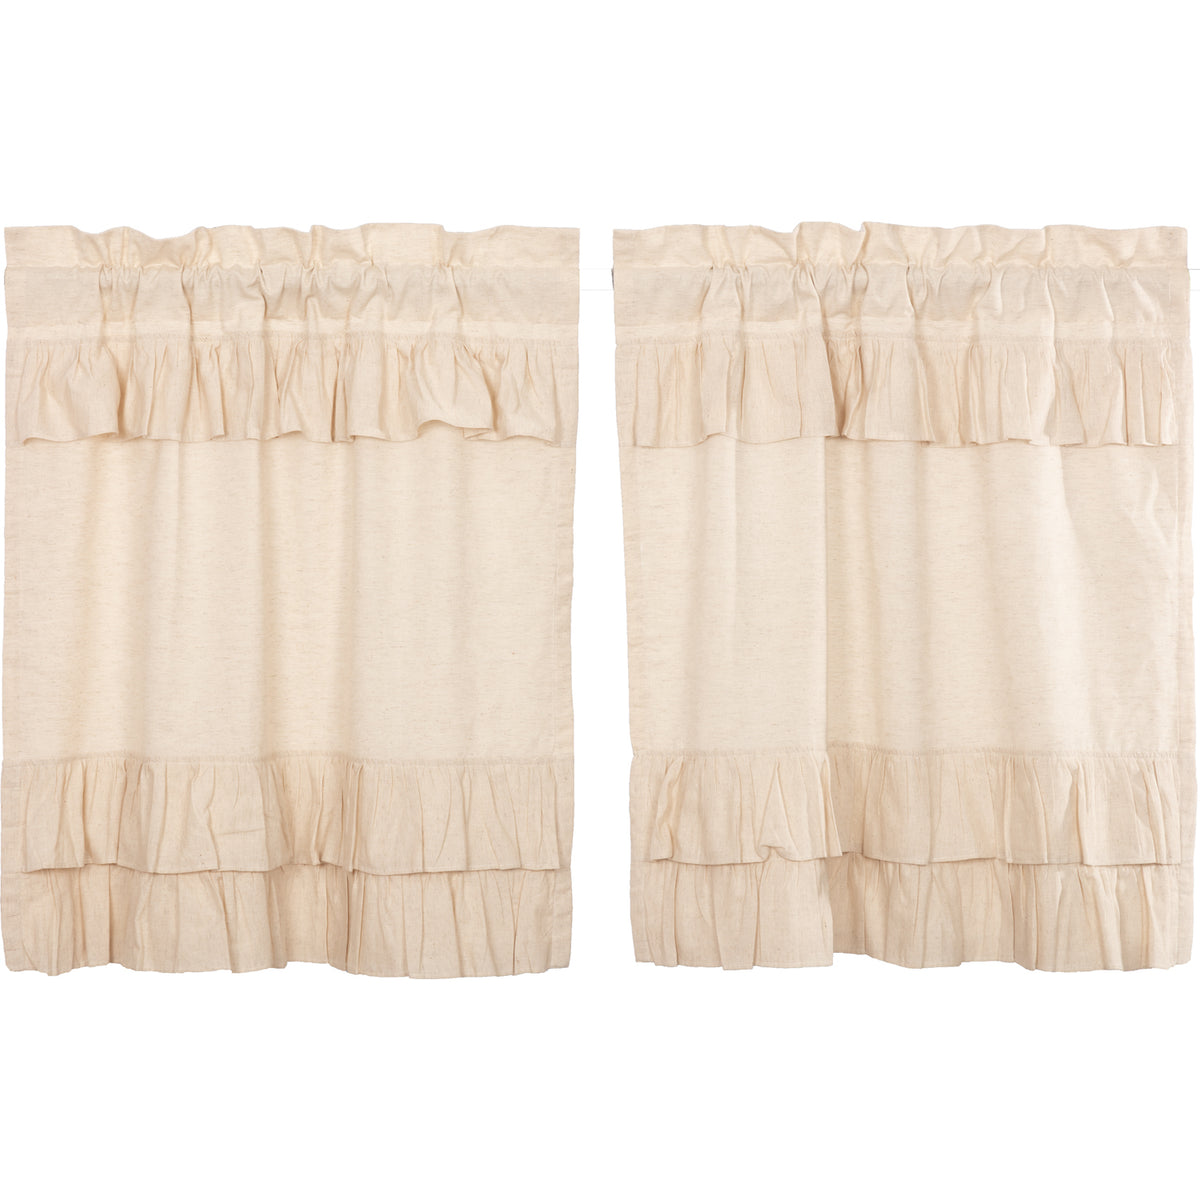 April & Olive Simple Life Flax Natural Ruffled Tier Set of 2 L36xW36 By VHC Brands